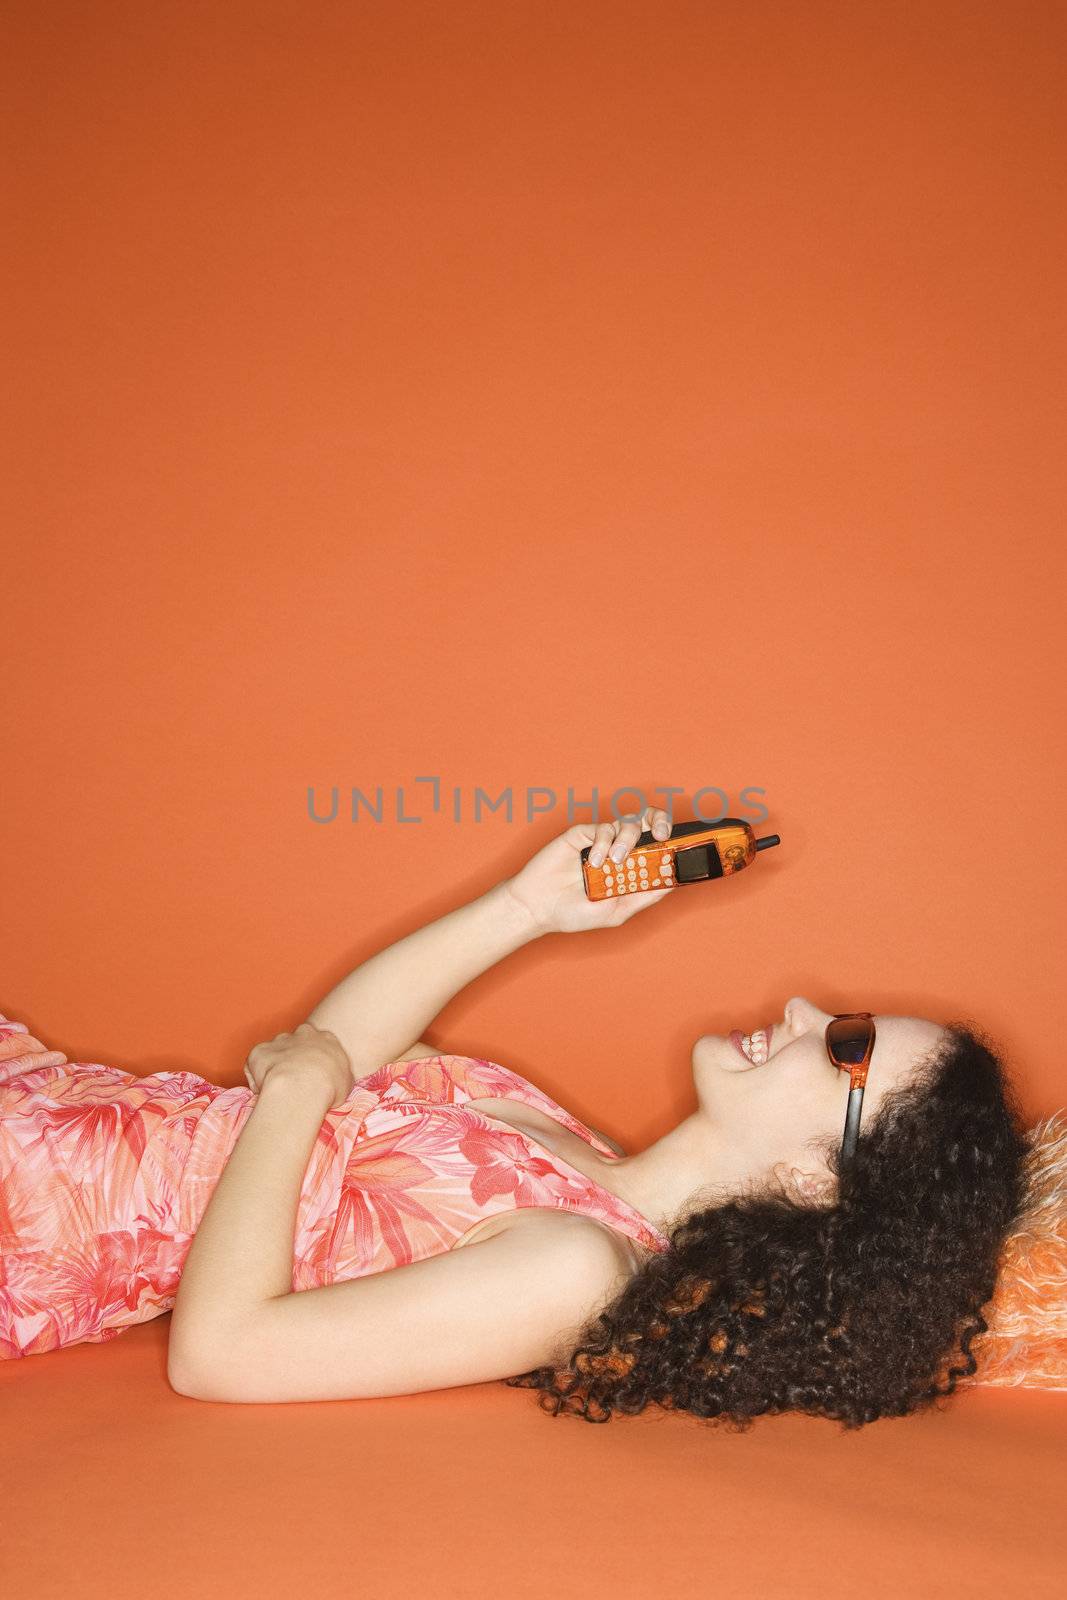 Young Caucasian woman lying on floor looking at cell phone on orange background.